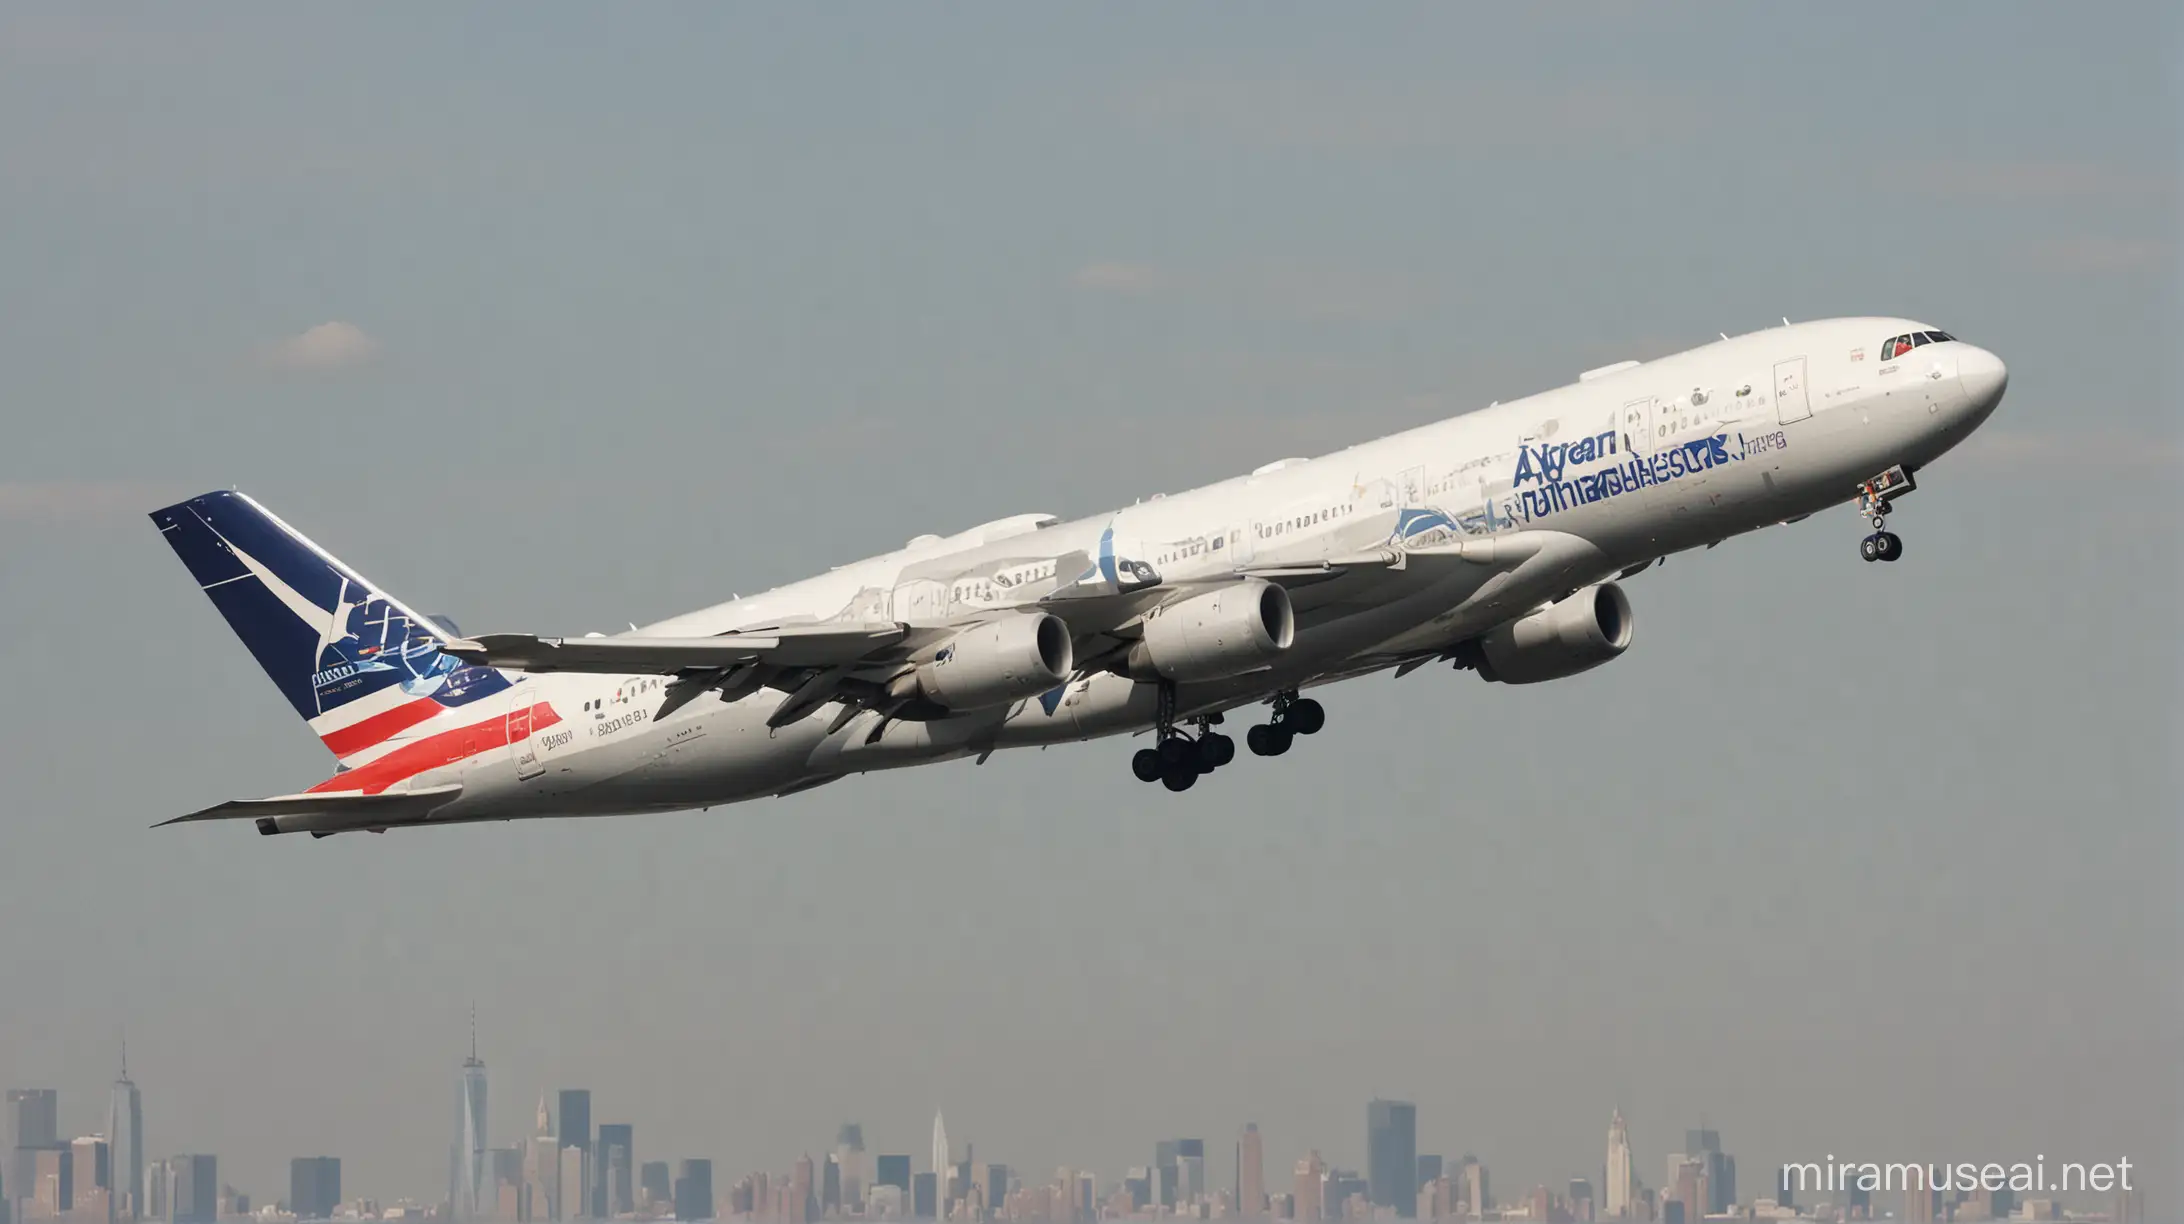 Make me a picture of an Airbus flight in 1970 with the best quality moving in the sky of New York